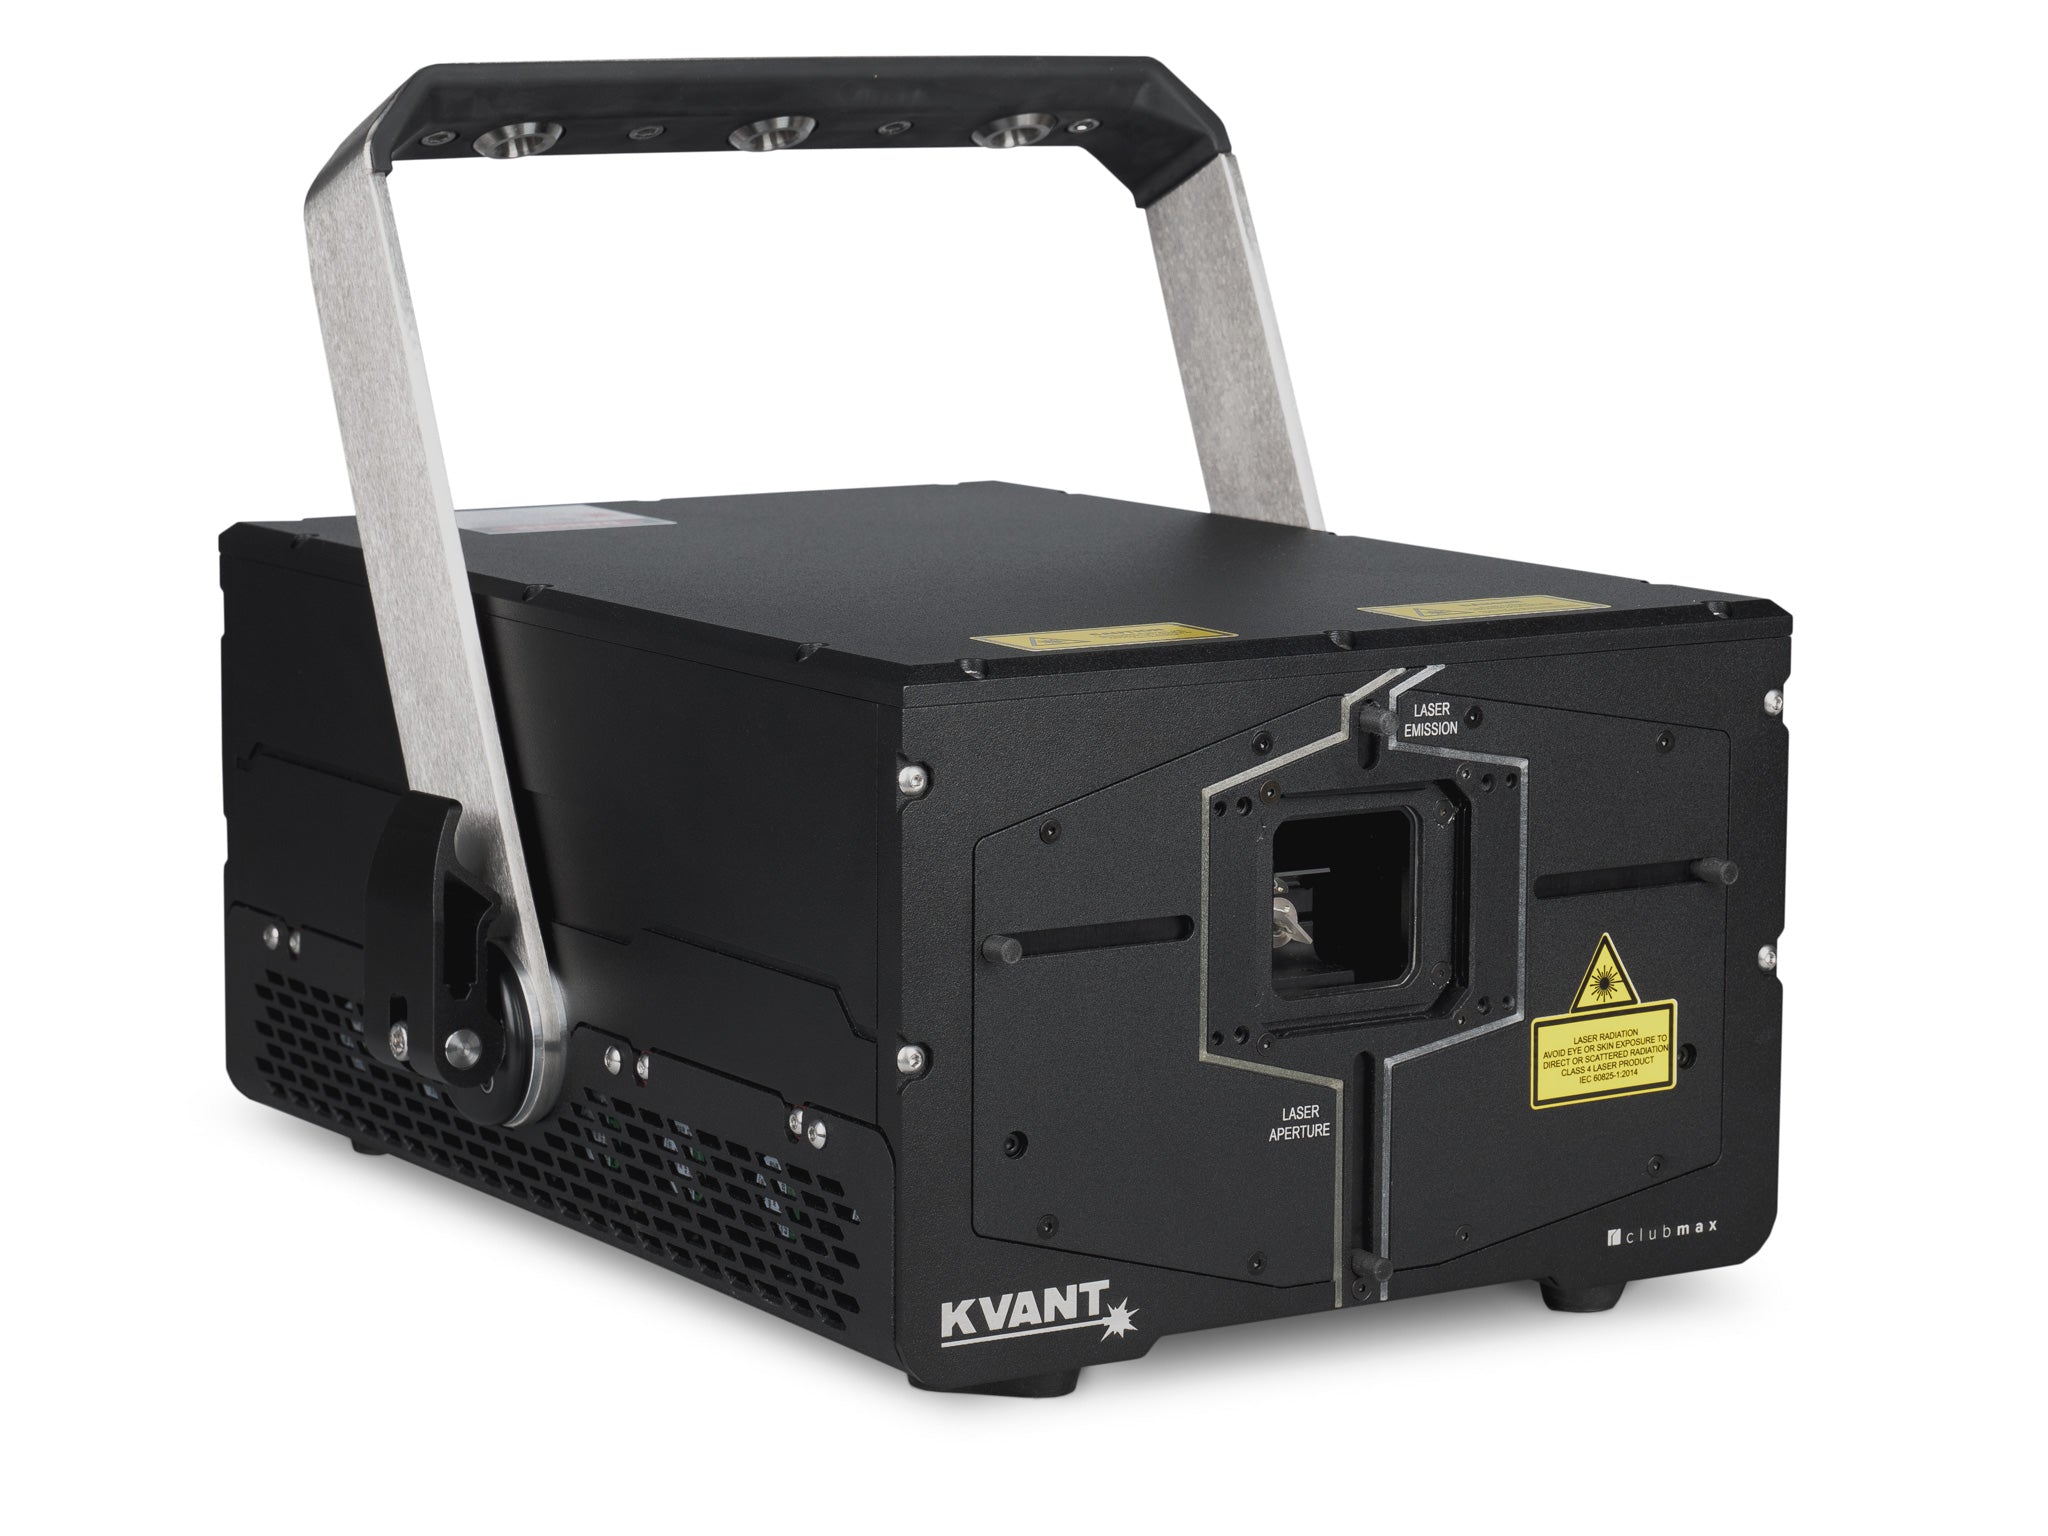 KVANT Clubmax 40 FB4 IP65 waterproof professional laser projector for outdoor shows_1